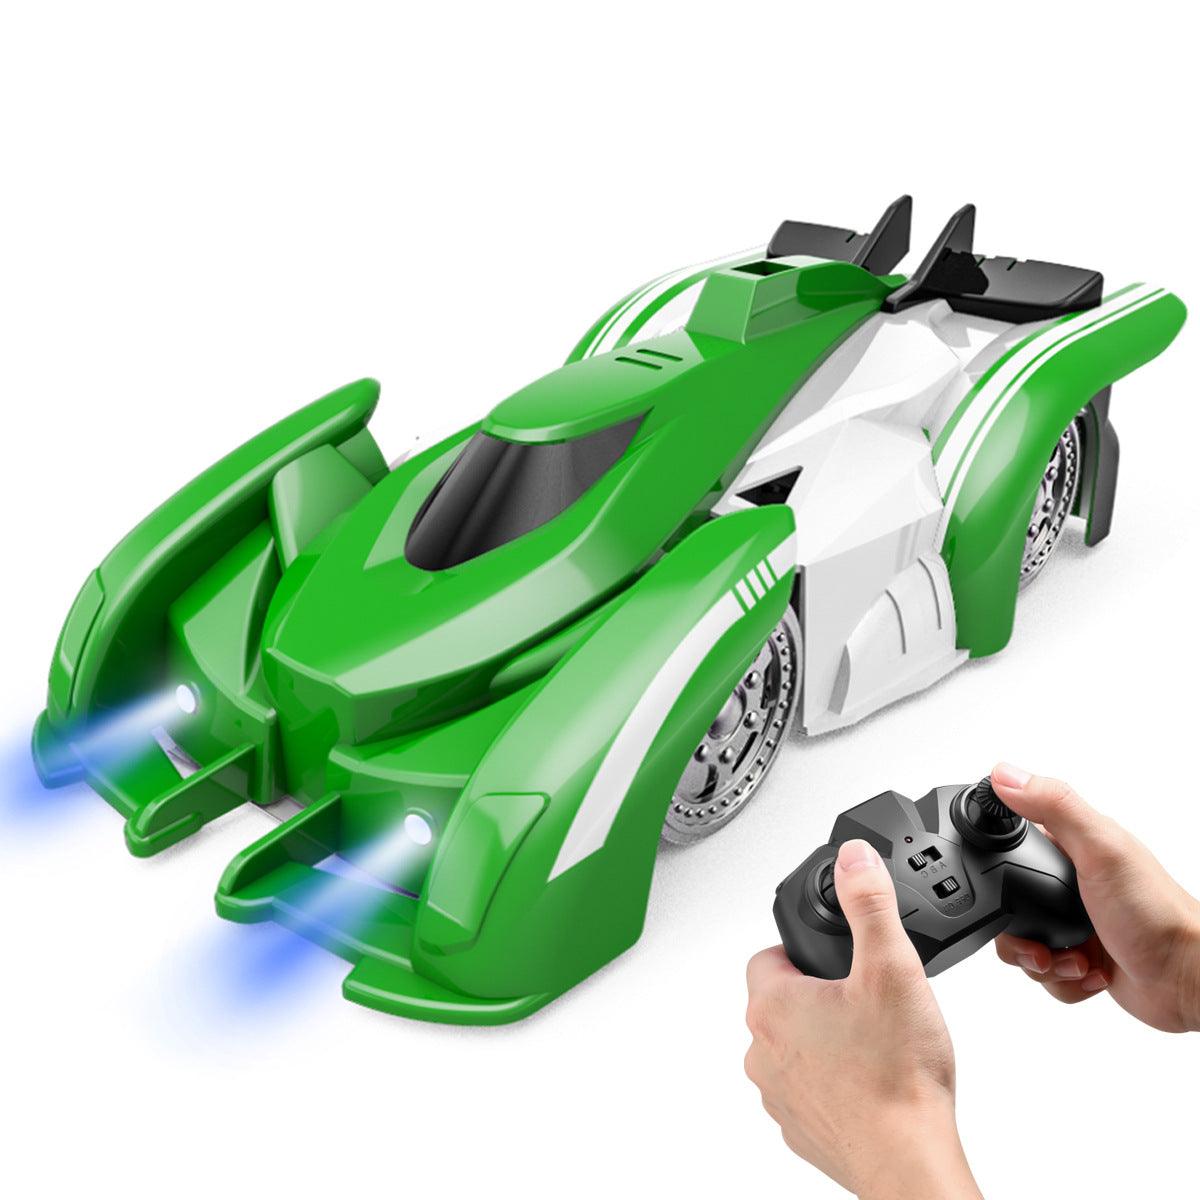 Wall Climbing RC Remote Control Wireless Car Intelligent Treat Toys - Green - 0 - CozyBuys